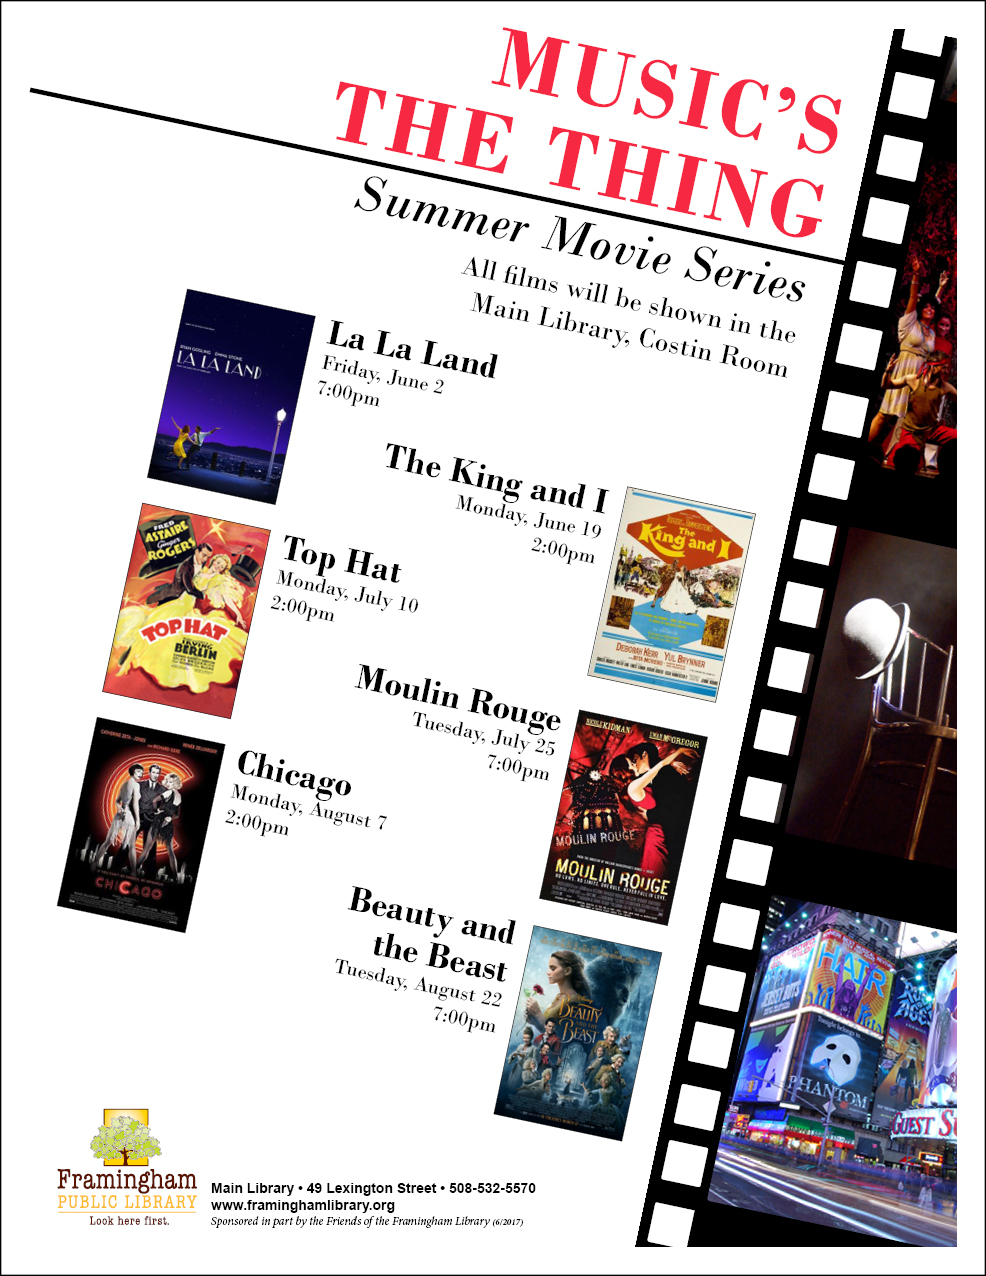 Music’s The Thing Summer Movies Series: Moulin Rouge thumbnail Photo